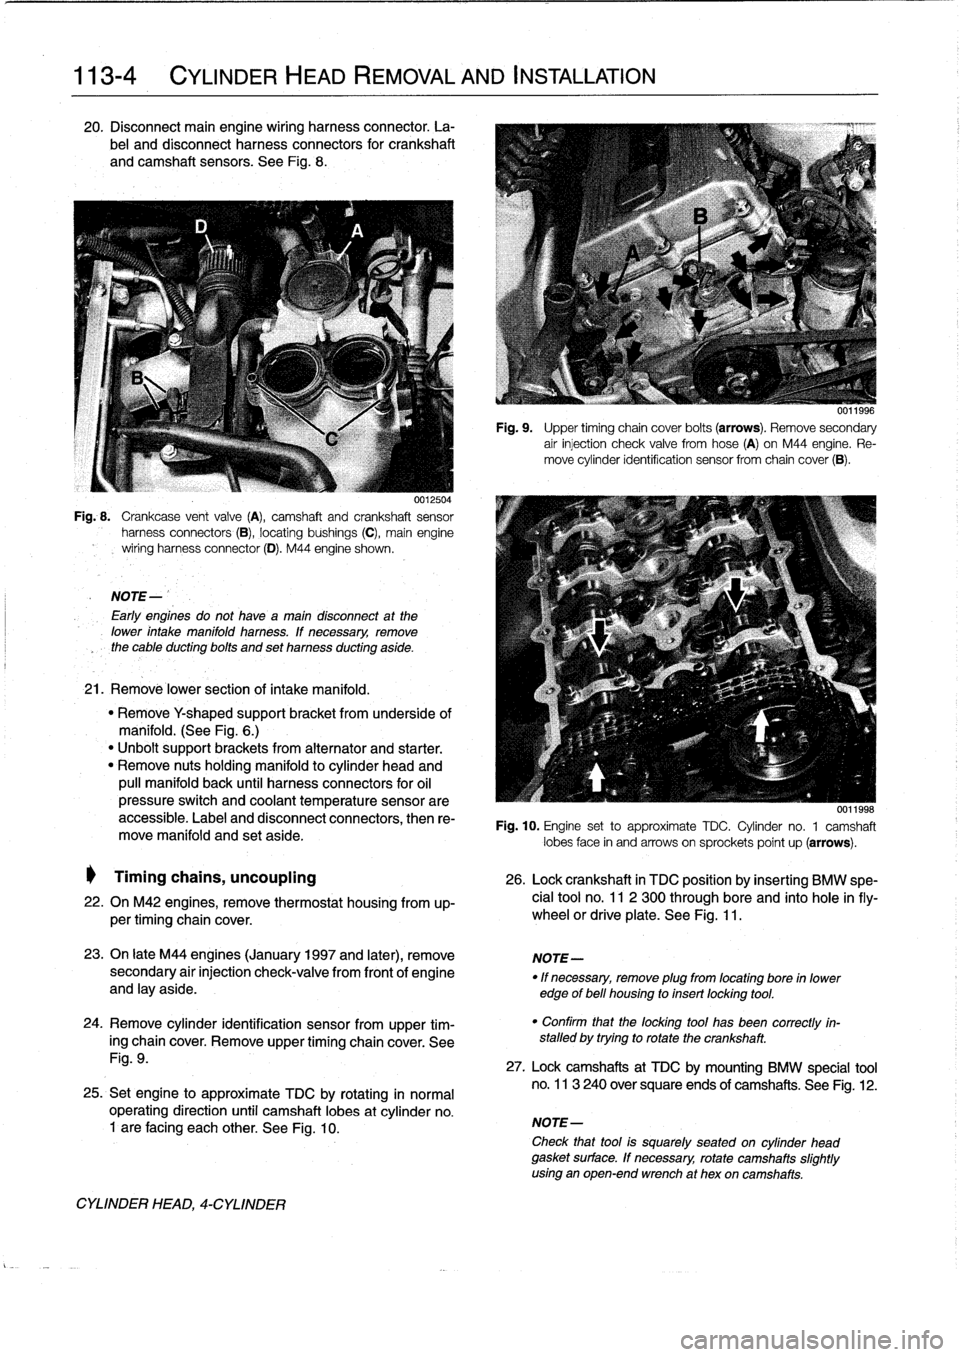 BMW 318i 1997 E36 Workshop Manual 
113-4

	

CYLINDER
HEAD
REMOVAL
AND
INSTALLATION

20
.
Disconnect
main
engine
wiring
harness
connector
.
La-

bel
and
disconnect
harness
connectors
for
crankshaft

and
camshaft
sensors
.
See
Fig
.
8
